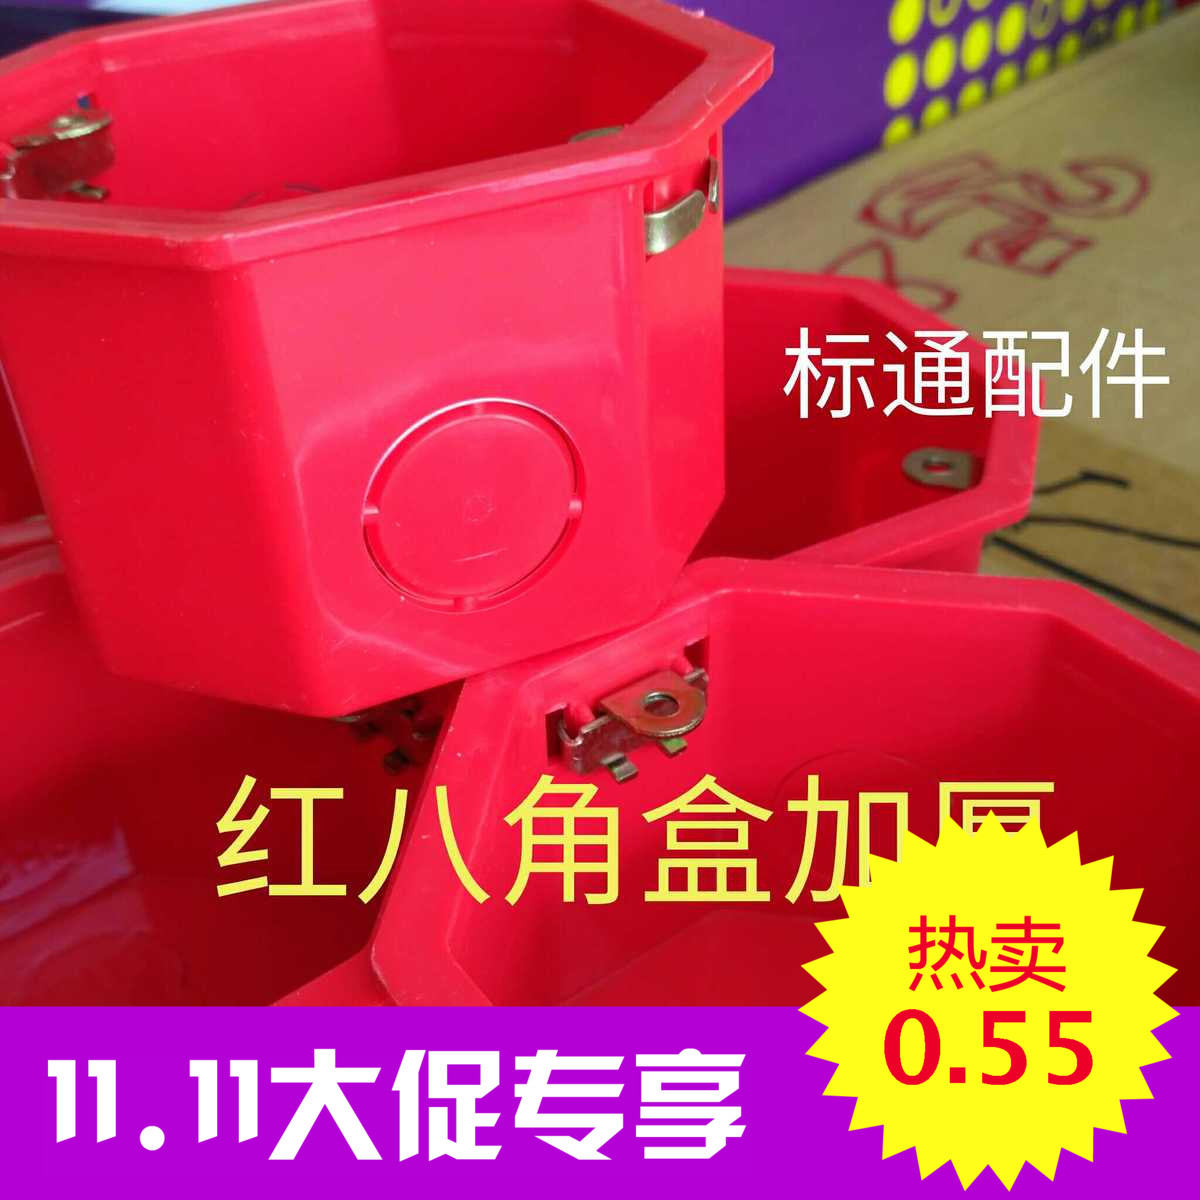 GB red five cents octagonal box lamp junction box concealed box wire and tube fittings Jiangsu Zhejiang and Shanghai a box